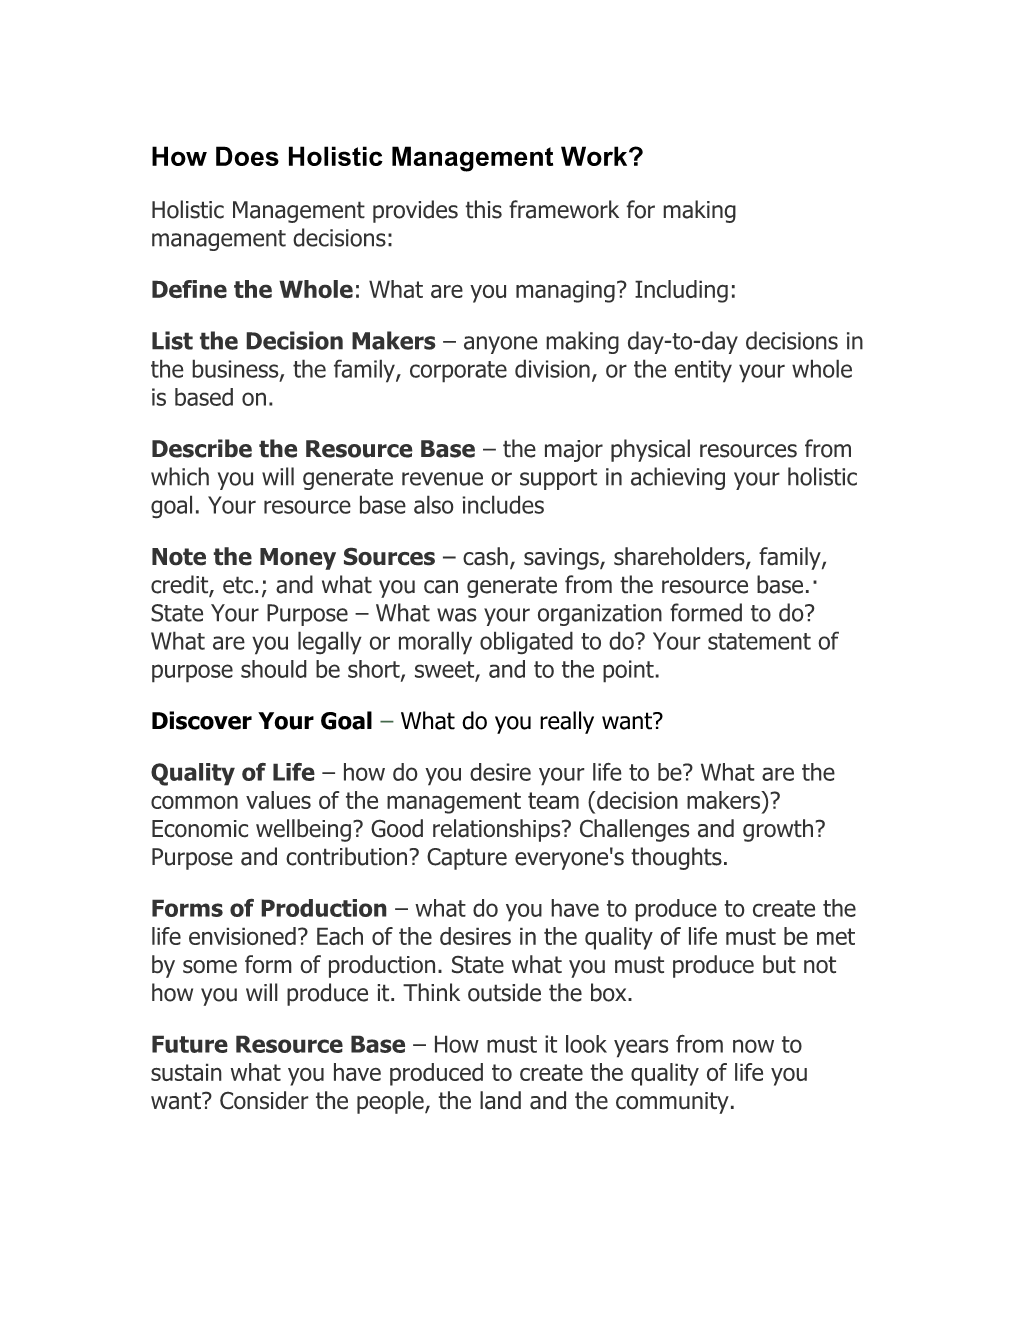 How Does Holistic Management Work